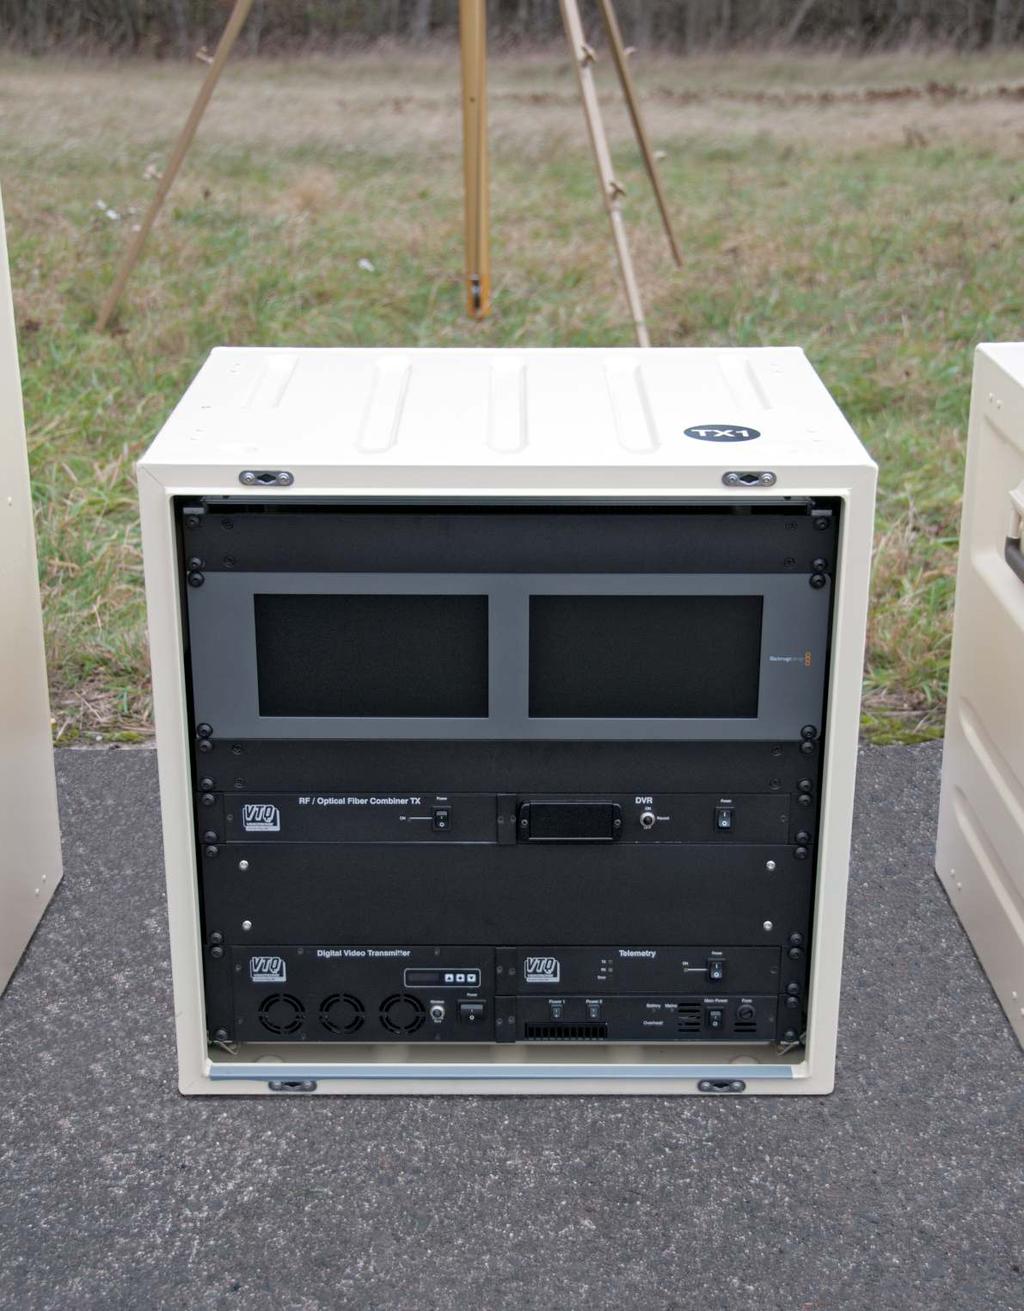 Rack - Rack is IP 65 from military suppliers ZARGES - Extra anti shock mounted 19" frame - High mobile at all conceivable places built up - Independently 2400Wh battery - High Resolution Broadcast